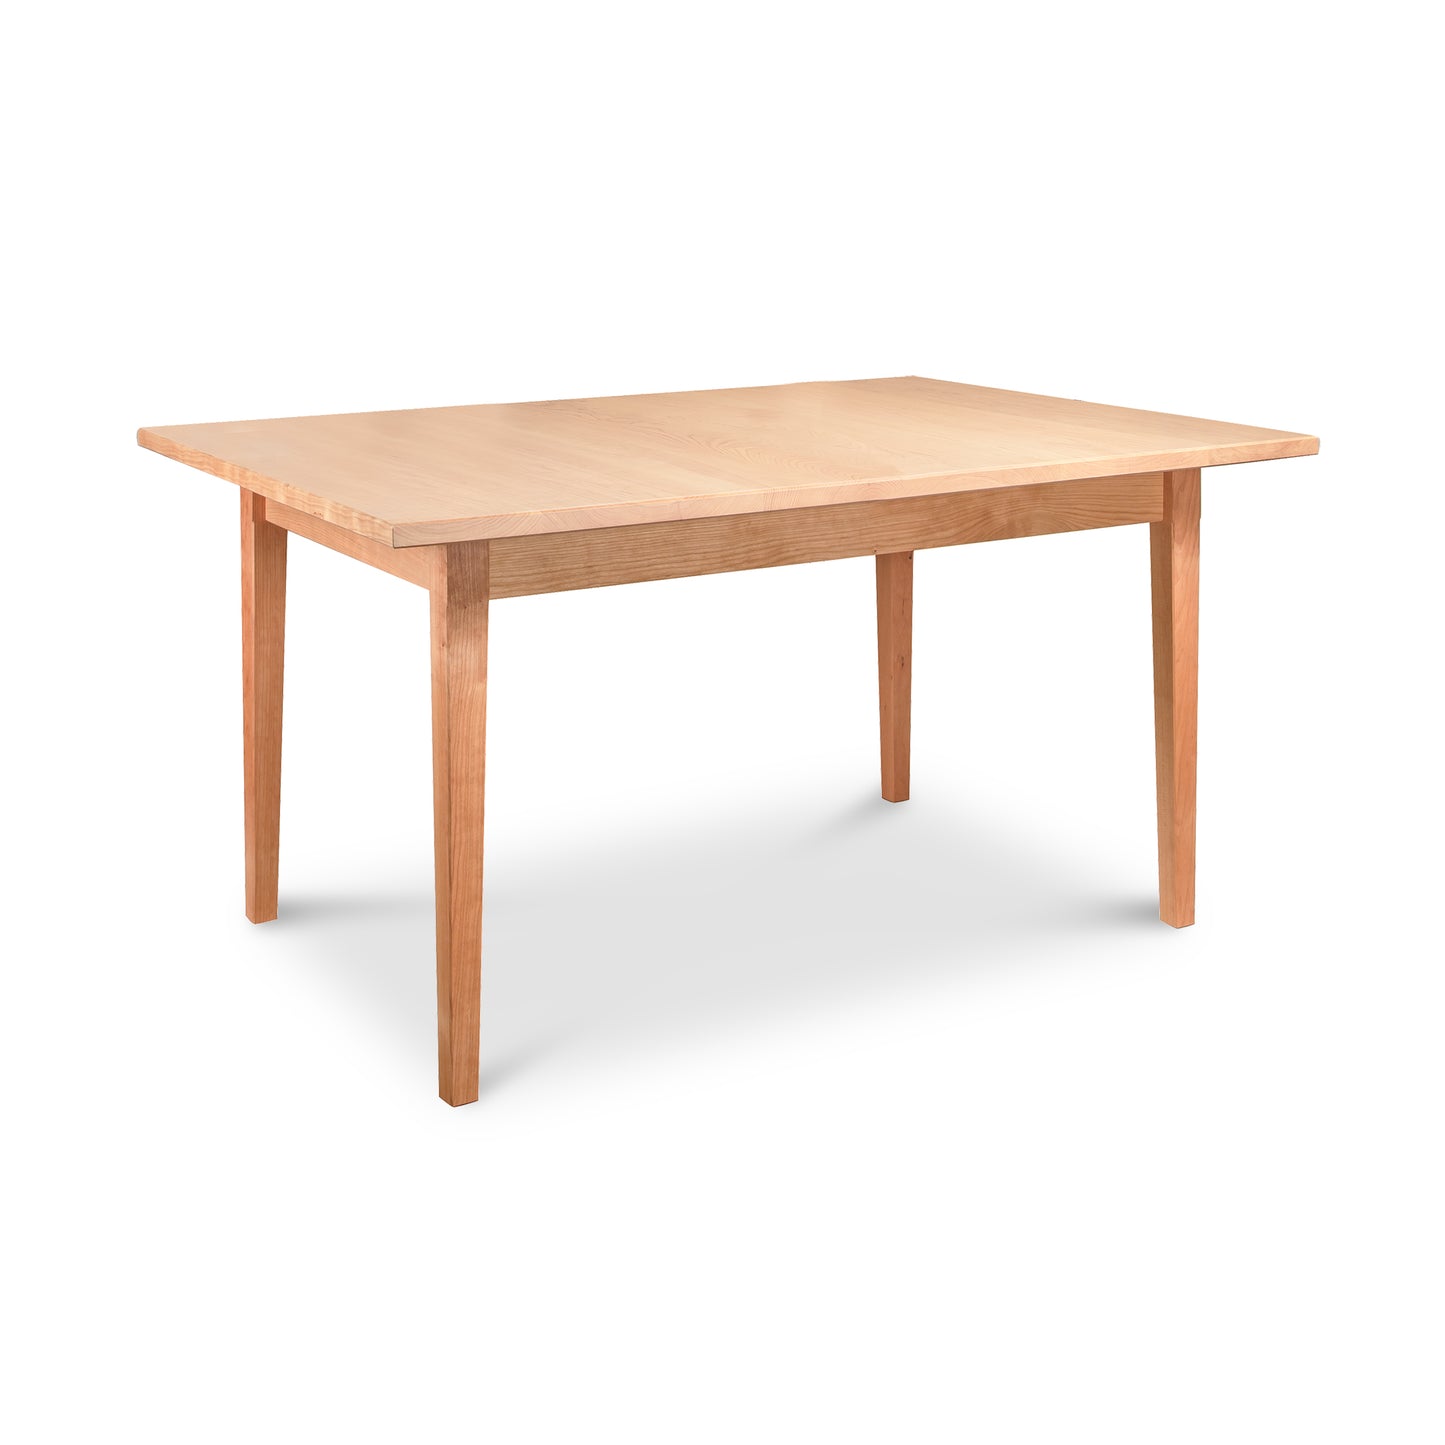 A simple Vermont Shaker Rectangular Solid Top Dining Table with a rectangular top and four legs, isolated on a white background by Maple Corner Woodworks.